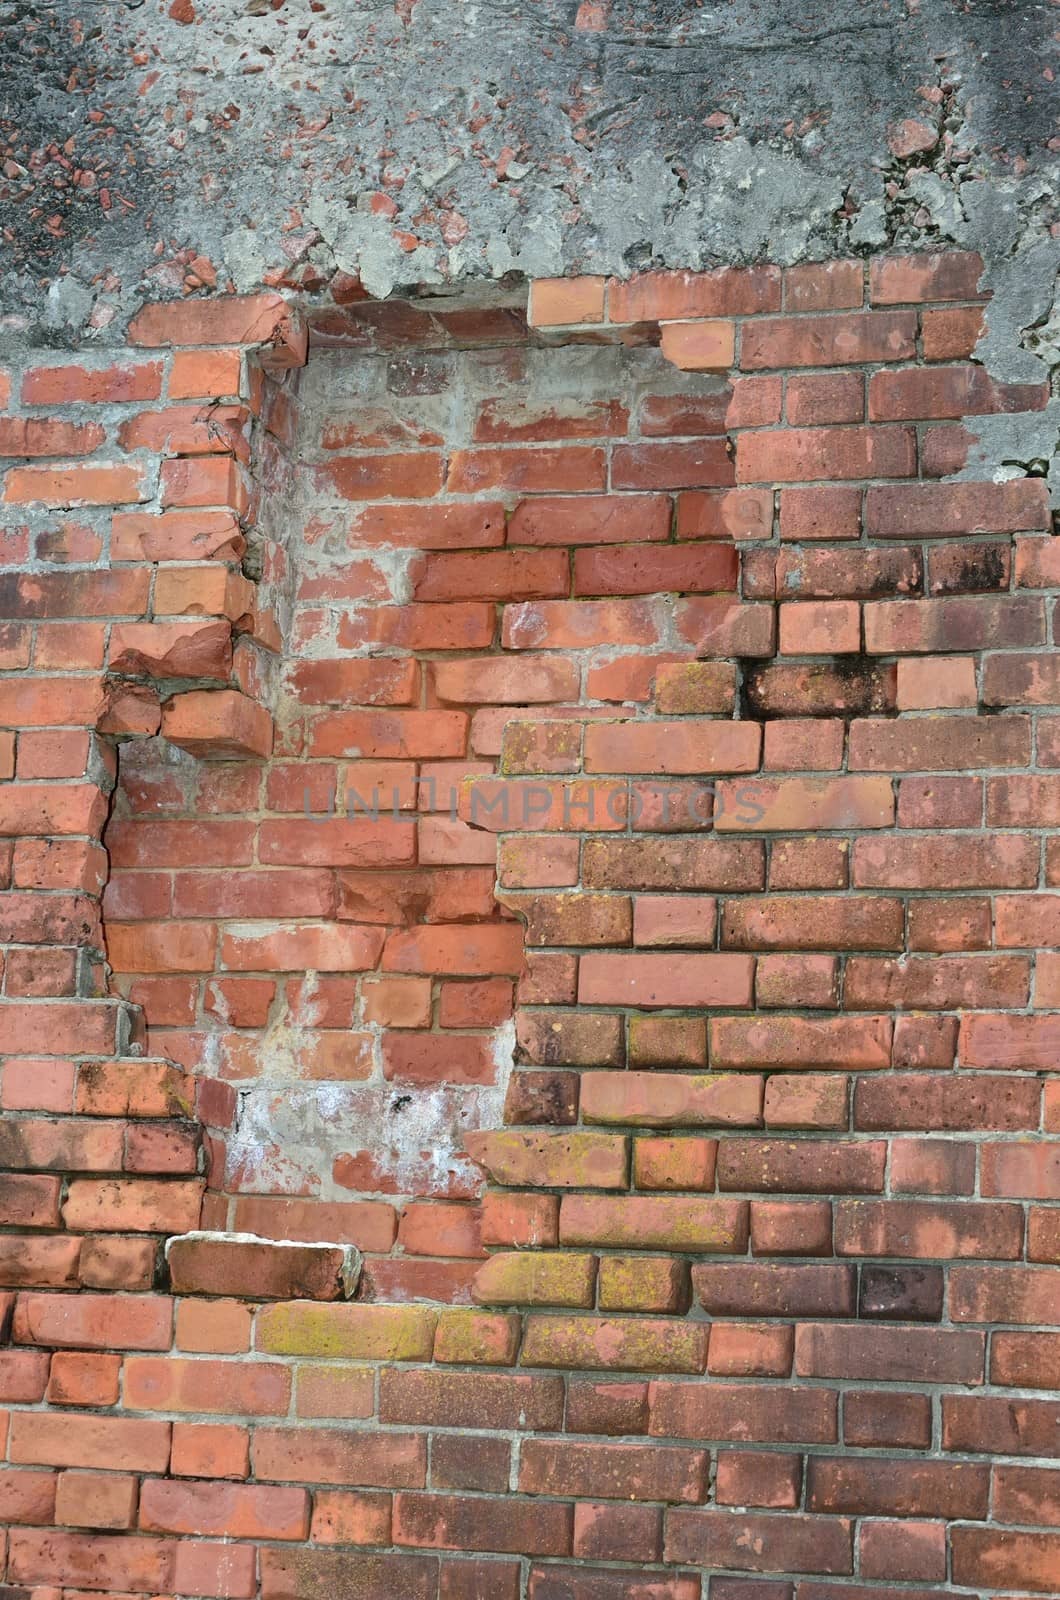 Double brick wall by jackie@debuskphoto.com